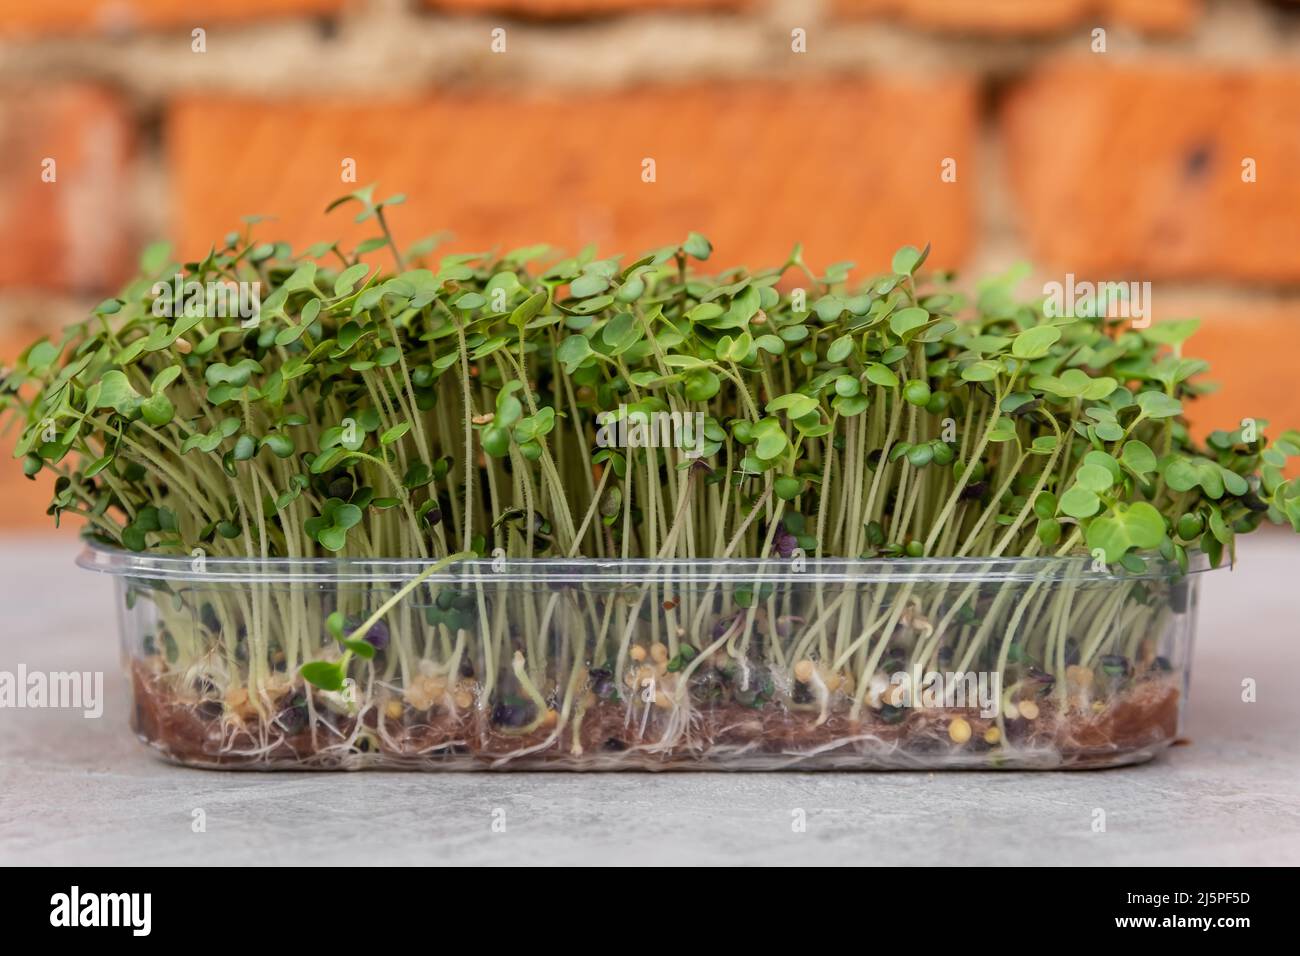 Roots of micro green plant. Growing kale sprouts for healthy salad. Stock Photo